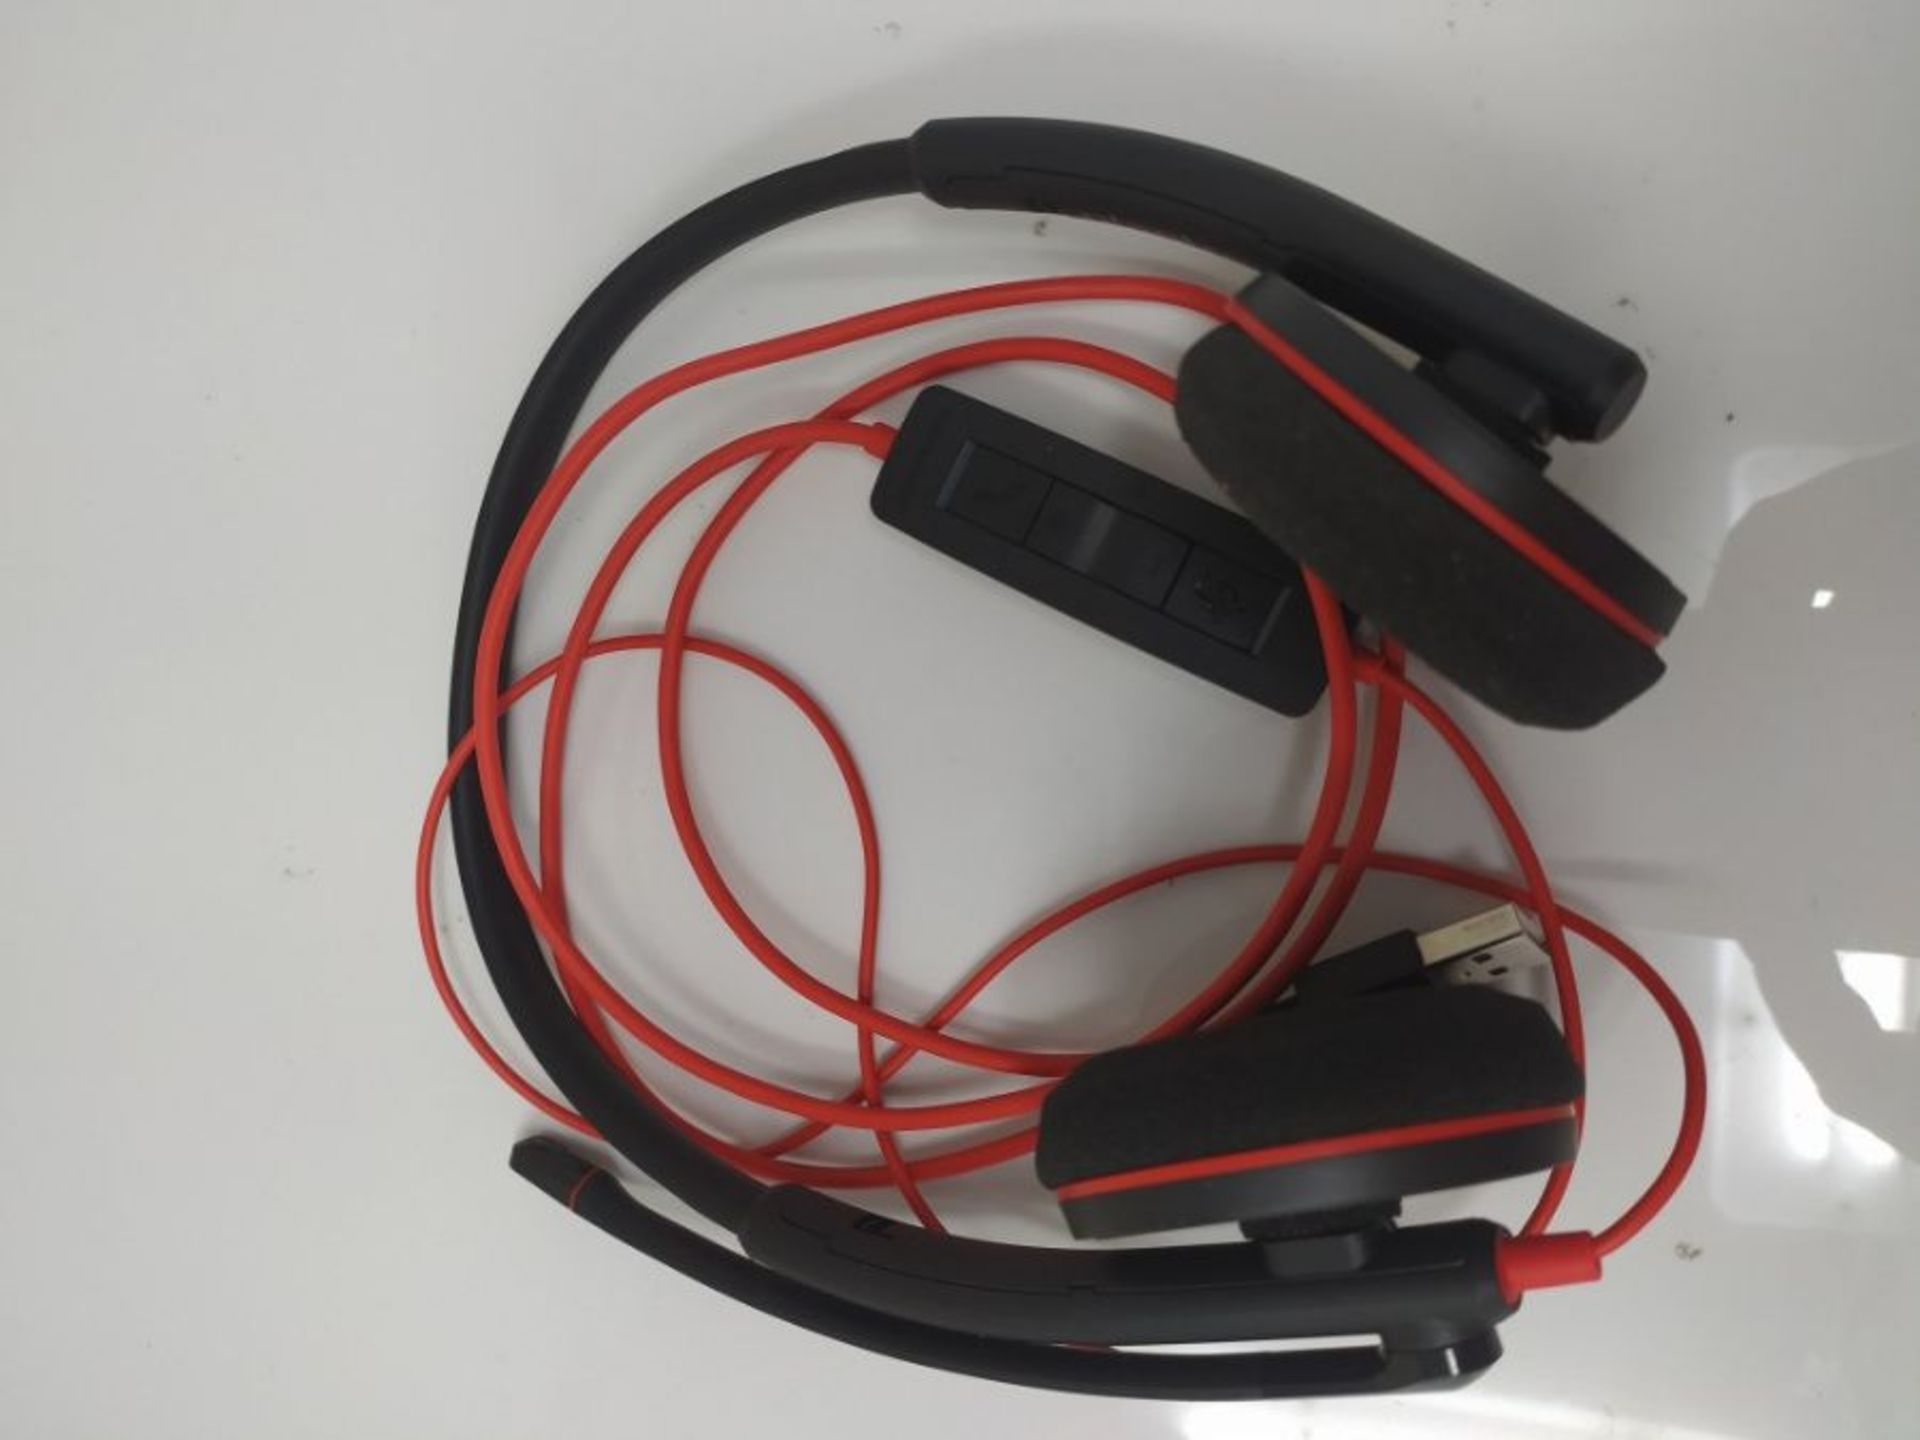 Plantronics Blackwire 3200 Stereo Corded UC Headset With USB Connectivity - Image 2 of 2